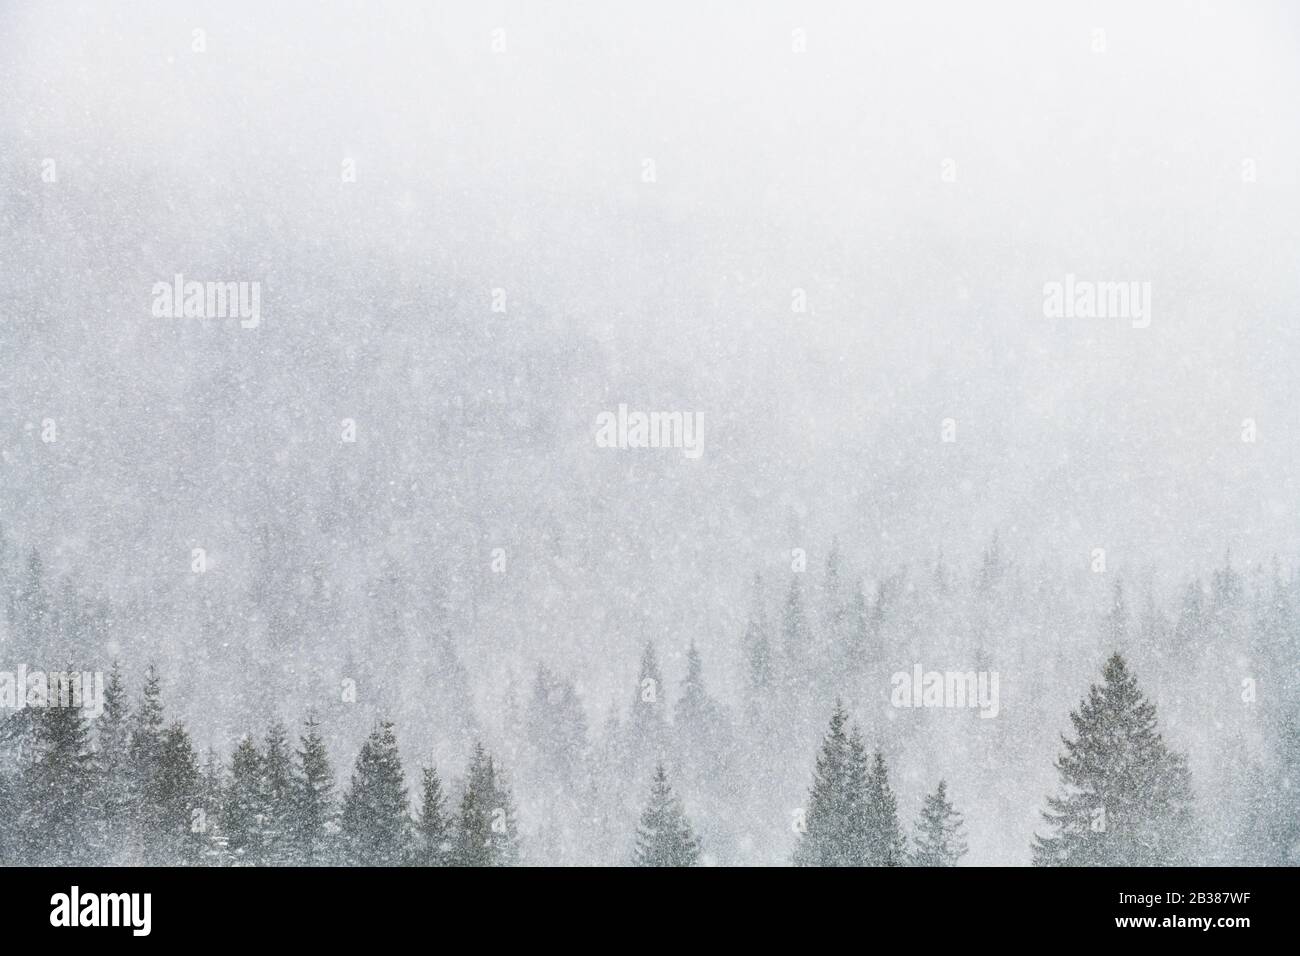 Snowstorm in winter mountains. Snowy spruce and pine forest. Landscape photography Stock Photo